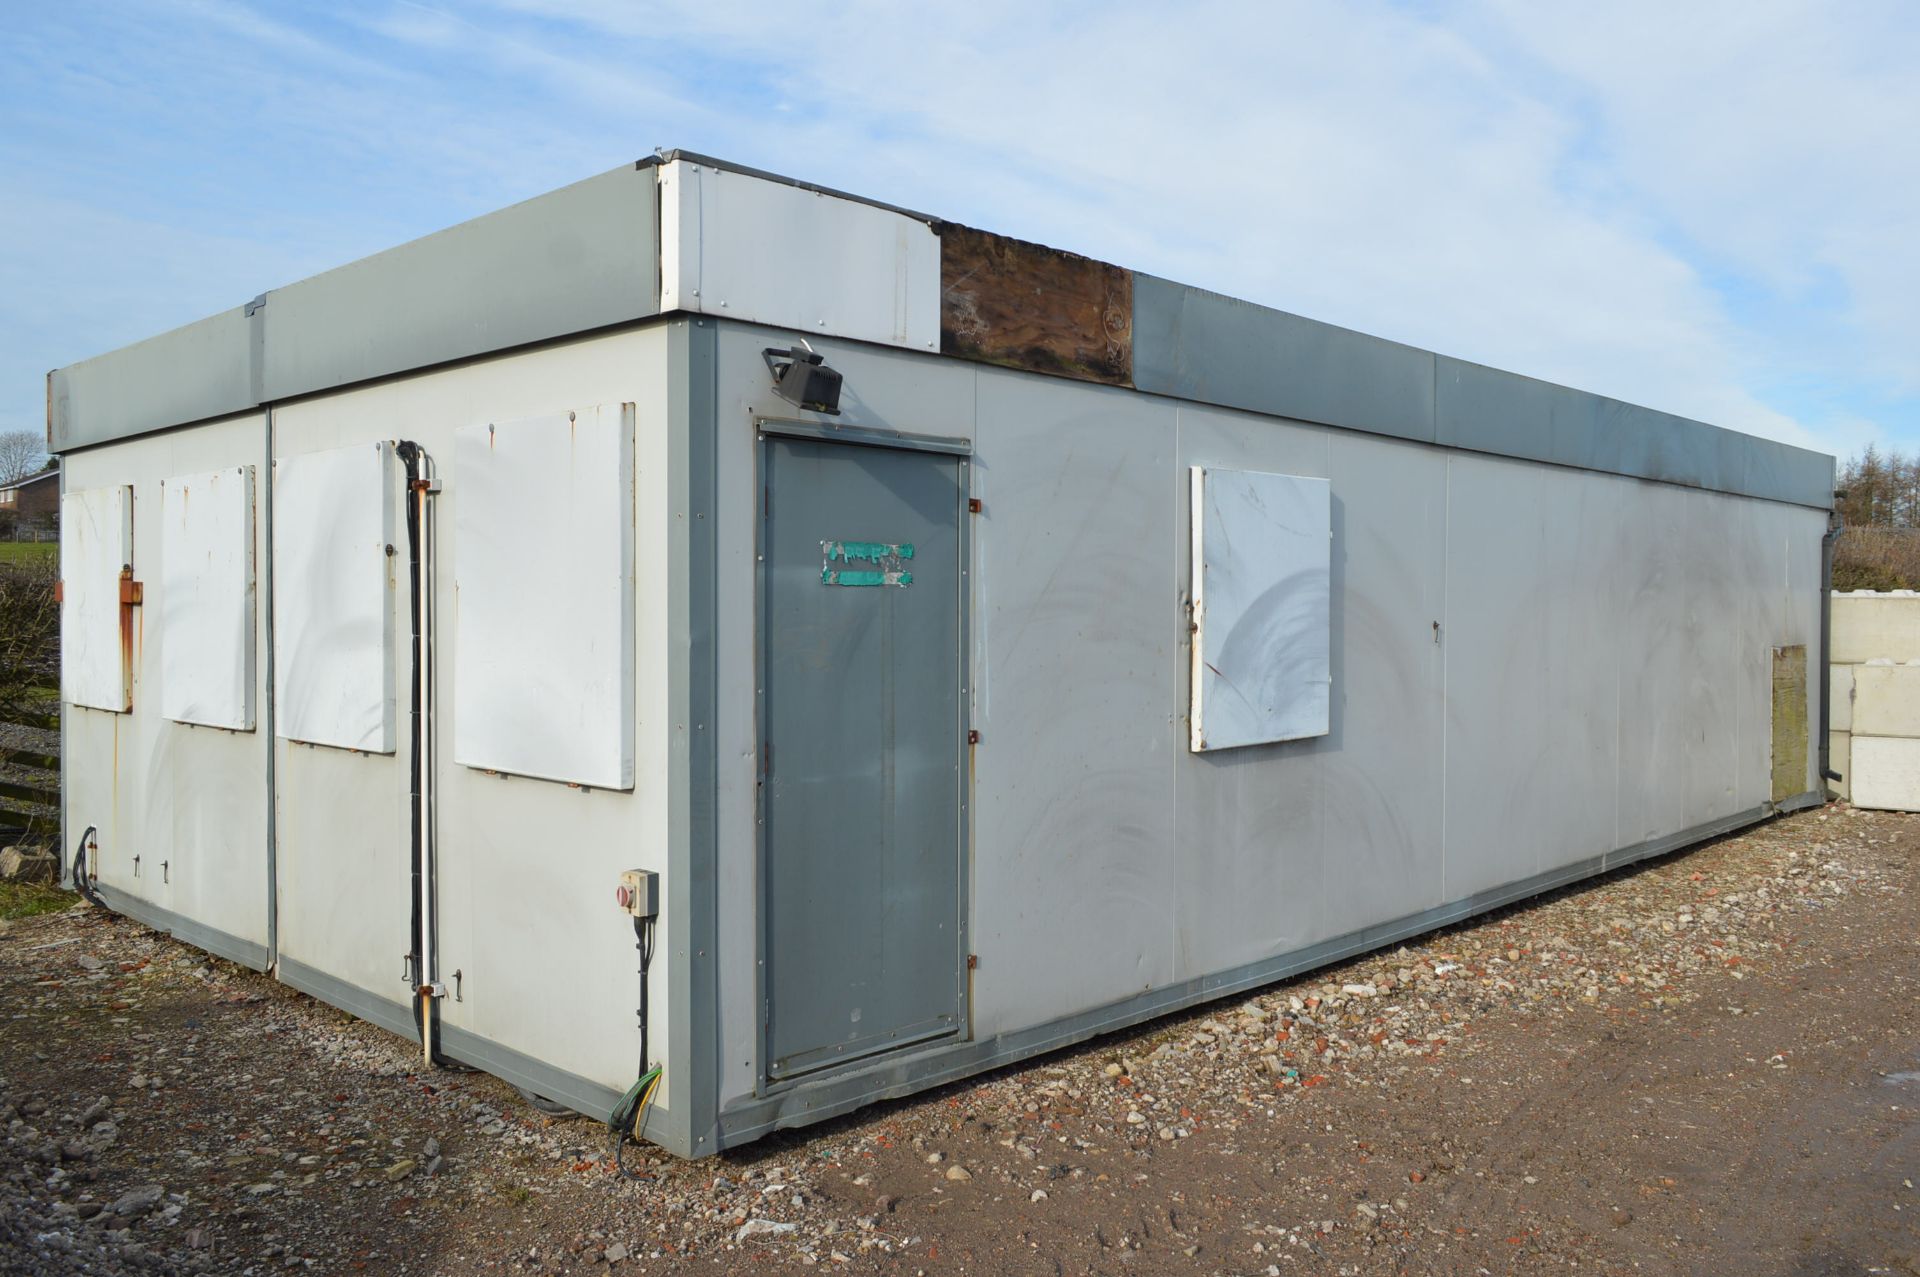 Two Section Portable Office Building, approx. 11.8m x 5.9m, NOTE 5%buyer’s premium + vat